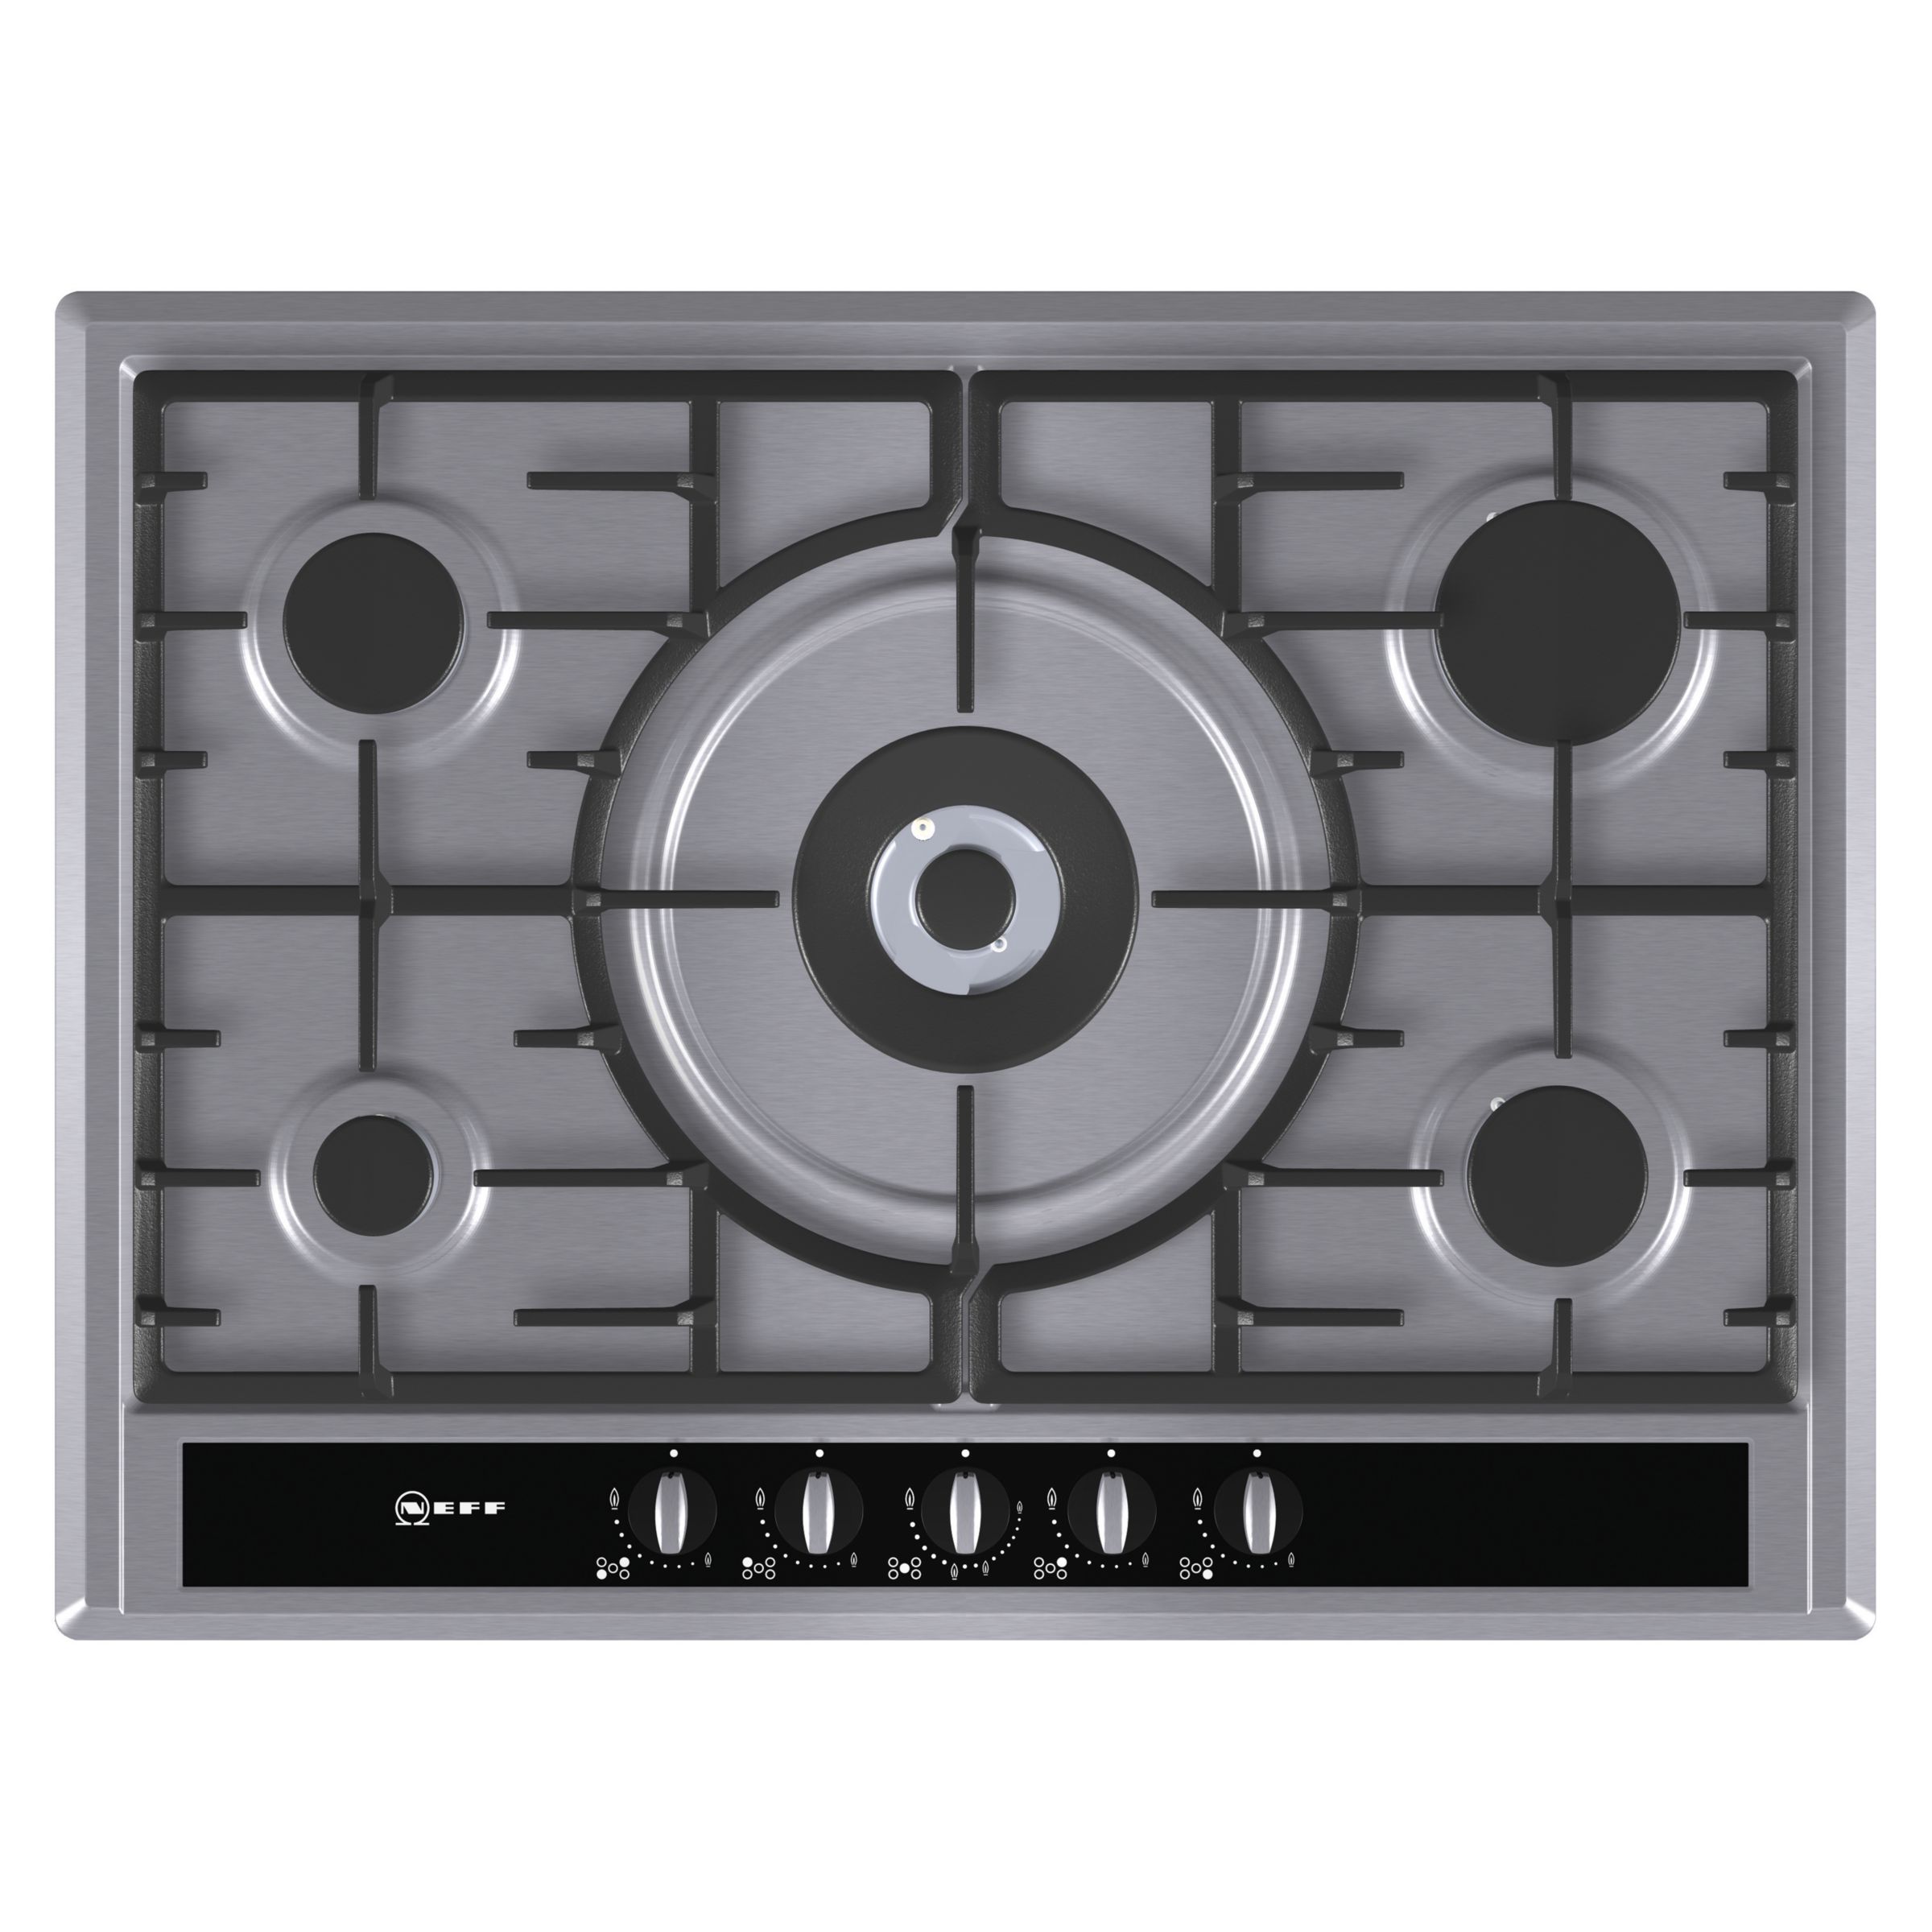 Neff T26S56 Gas Hob, Stainless Steel at John Lewis